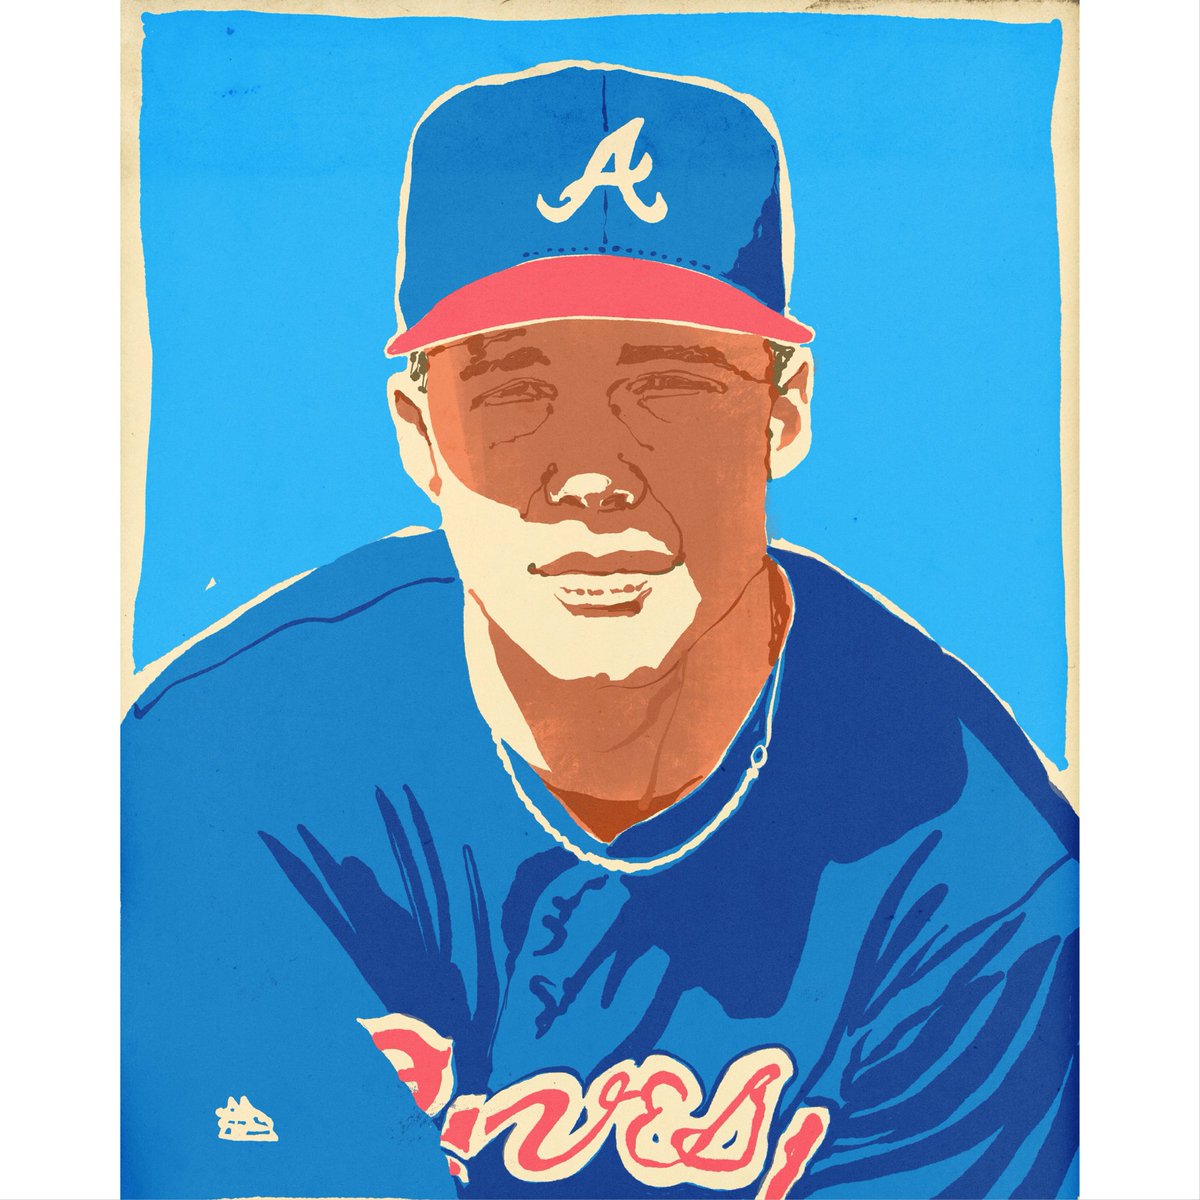 This Day in Baseball History: April 24, 2012 - Chipper Jones homers on his 40th birthday (off Aaron Harang) as the Braves beat the Dodgers, 4 - 3. He becomes the fifth player in major league history to do this. . . . #tripleplaydesign #chipperjones #atlantabraves #chipper